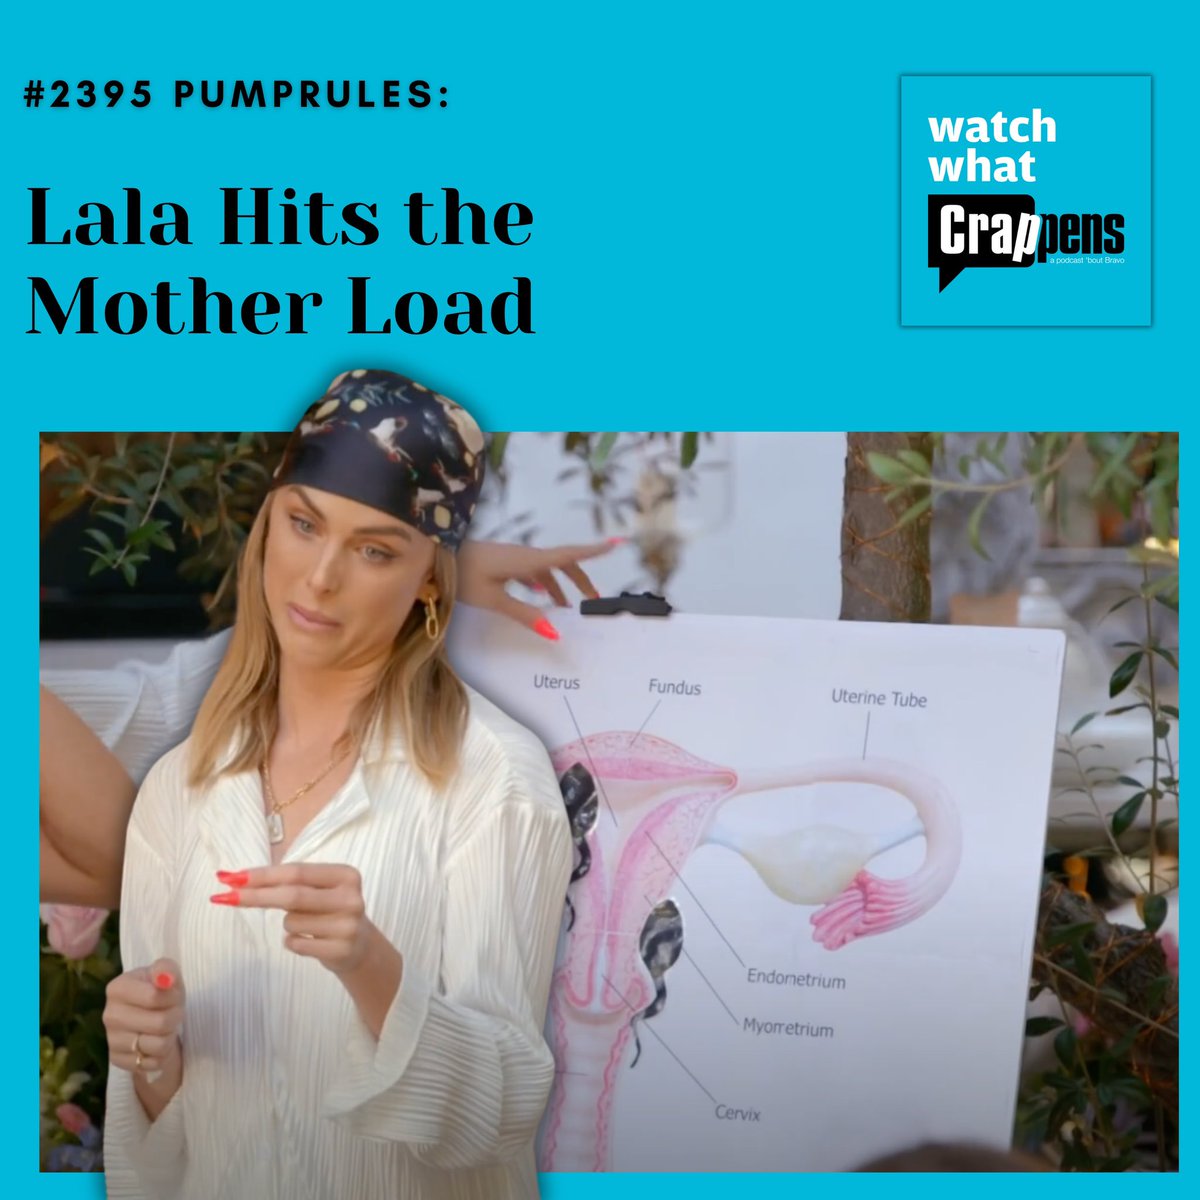 New epi! It’s a sexy sperm party on #VanderpumpRules as Lala crowdsources jizz for her future baby. Then, Sandoval - the true victim of the season - reels from Rachel’s bombshells on “some” podcast. Listen wherever you get your Podcasts or watch as a Crappens On Demand Video!